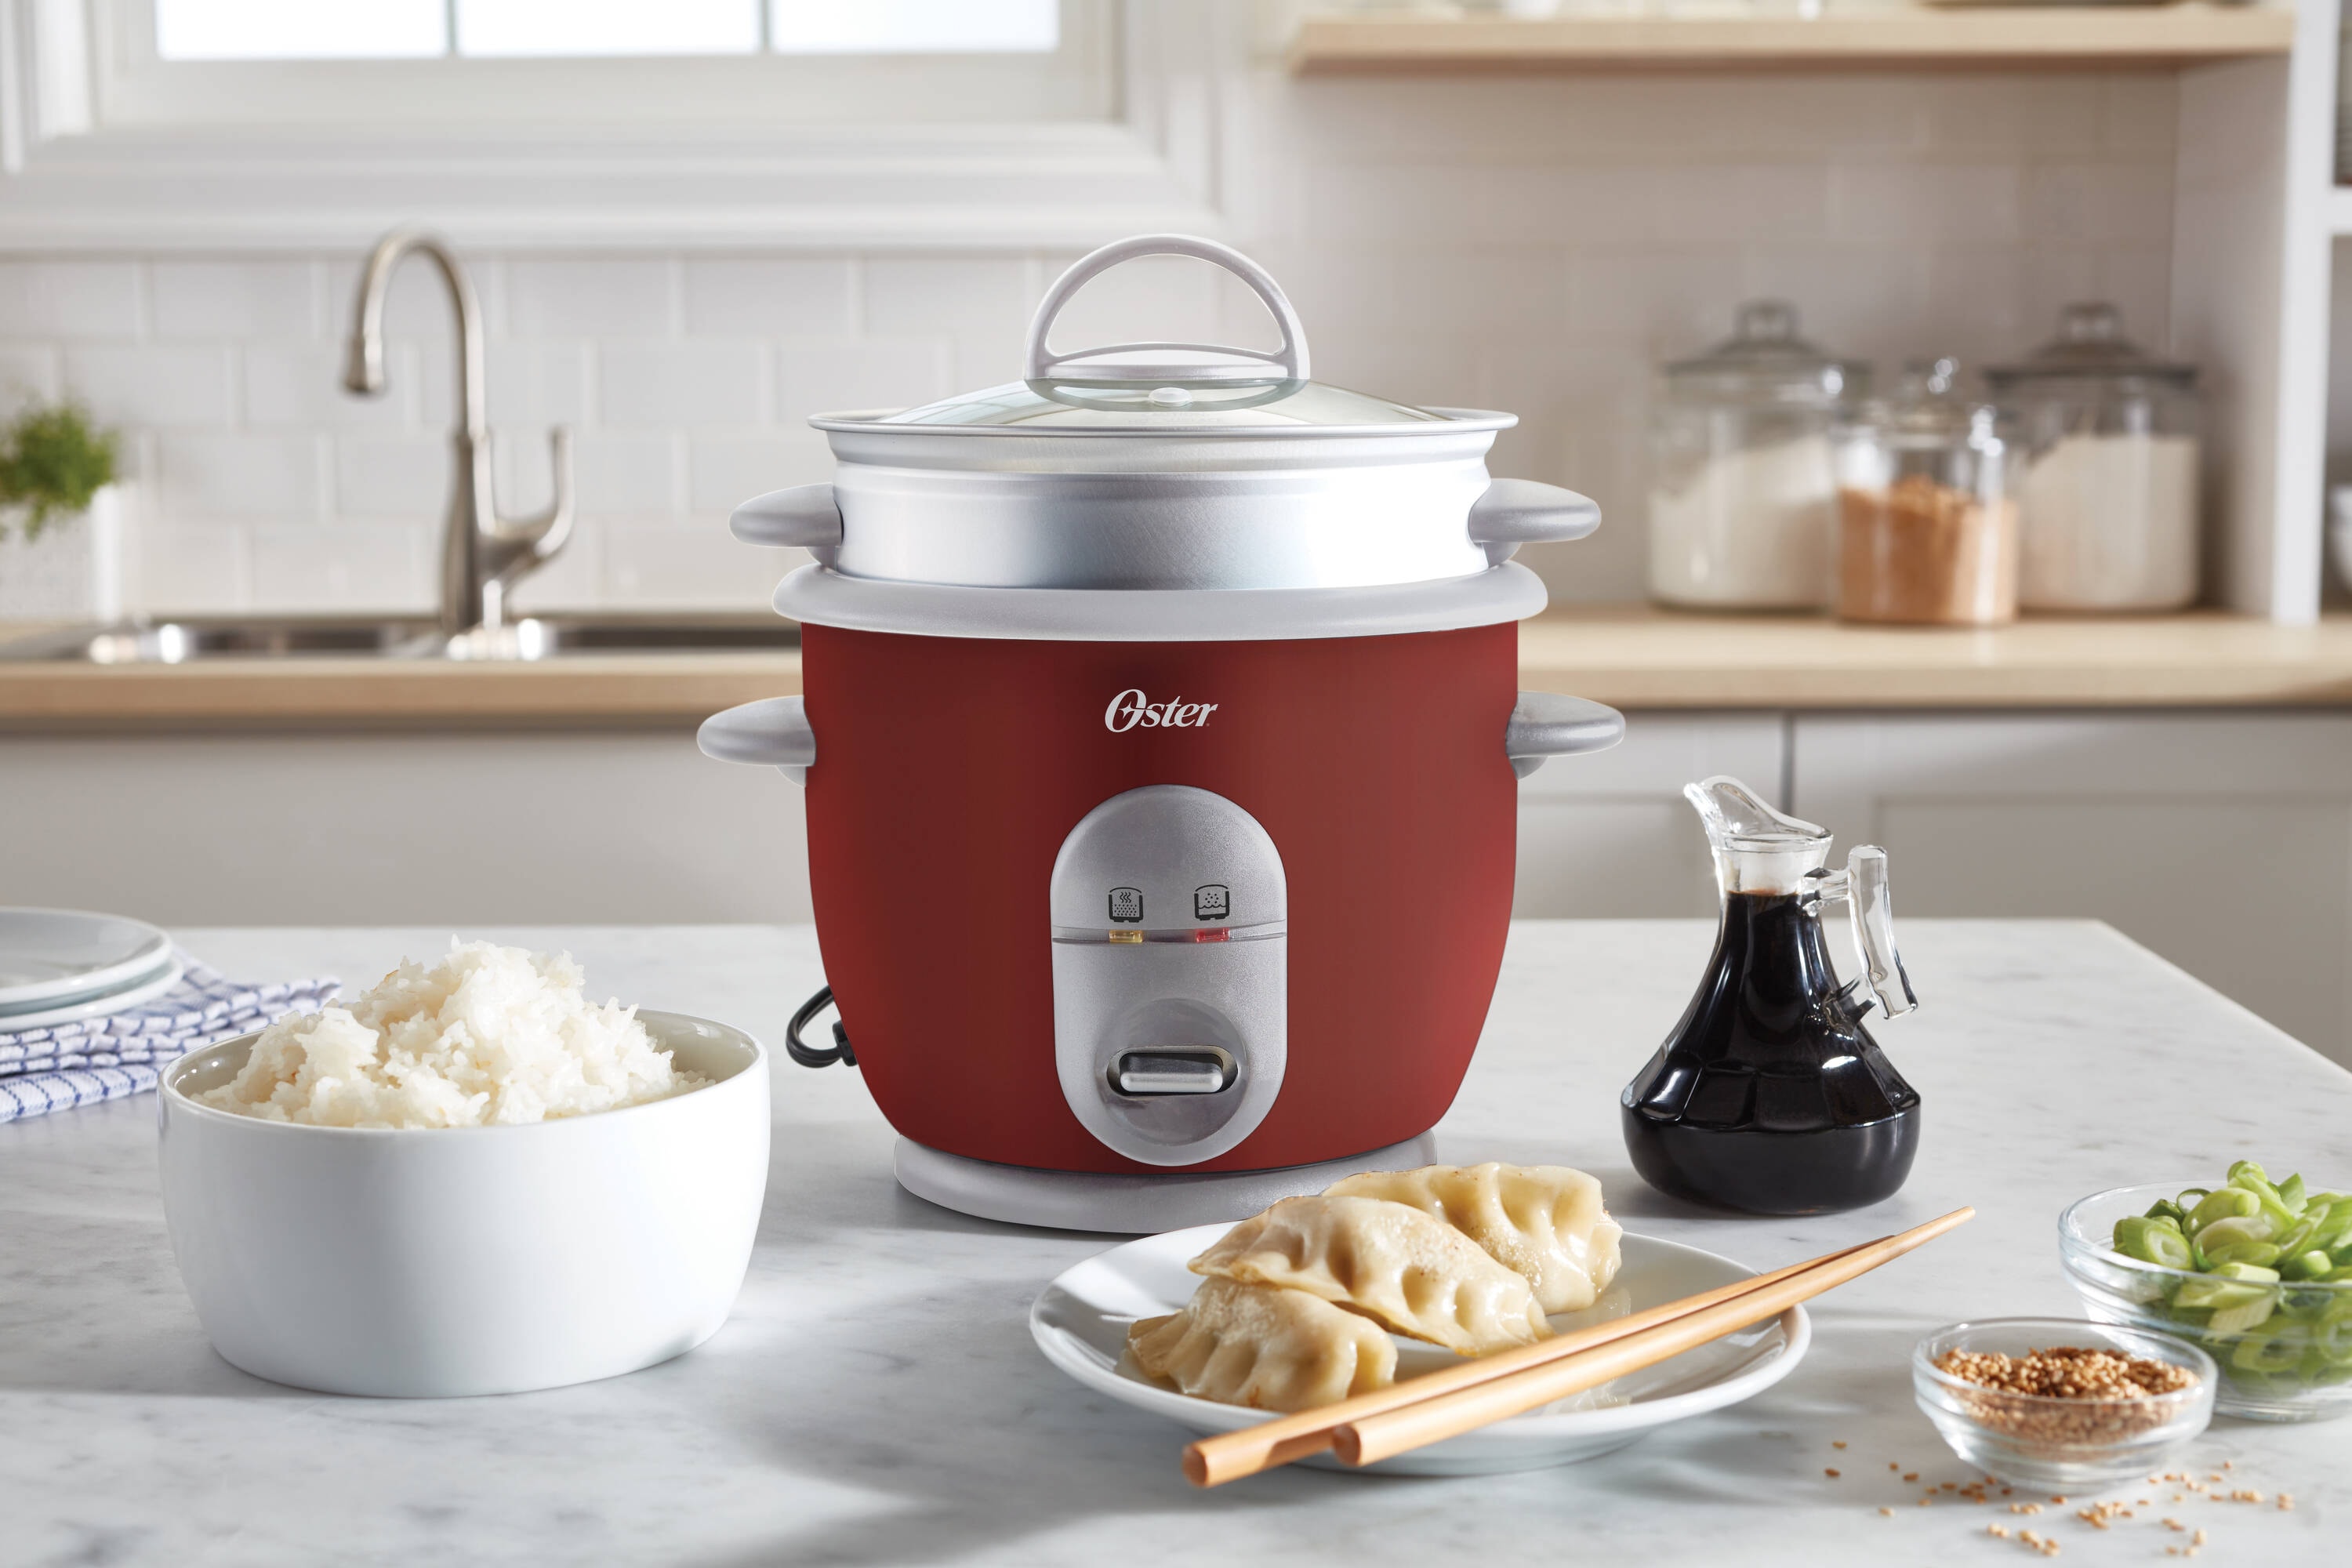 Salton Black Rice Cooker and Steamer with Glass Lid - Makes up to 6 Cups of  Fluffy Rice and Quinoa in the Rice Cookers department at